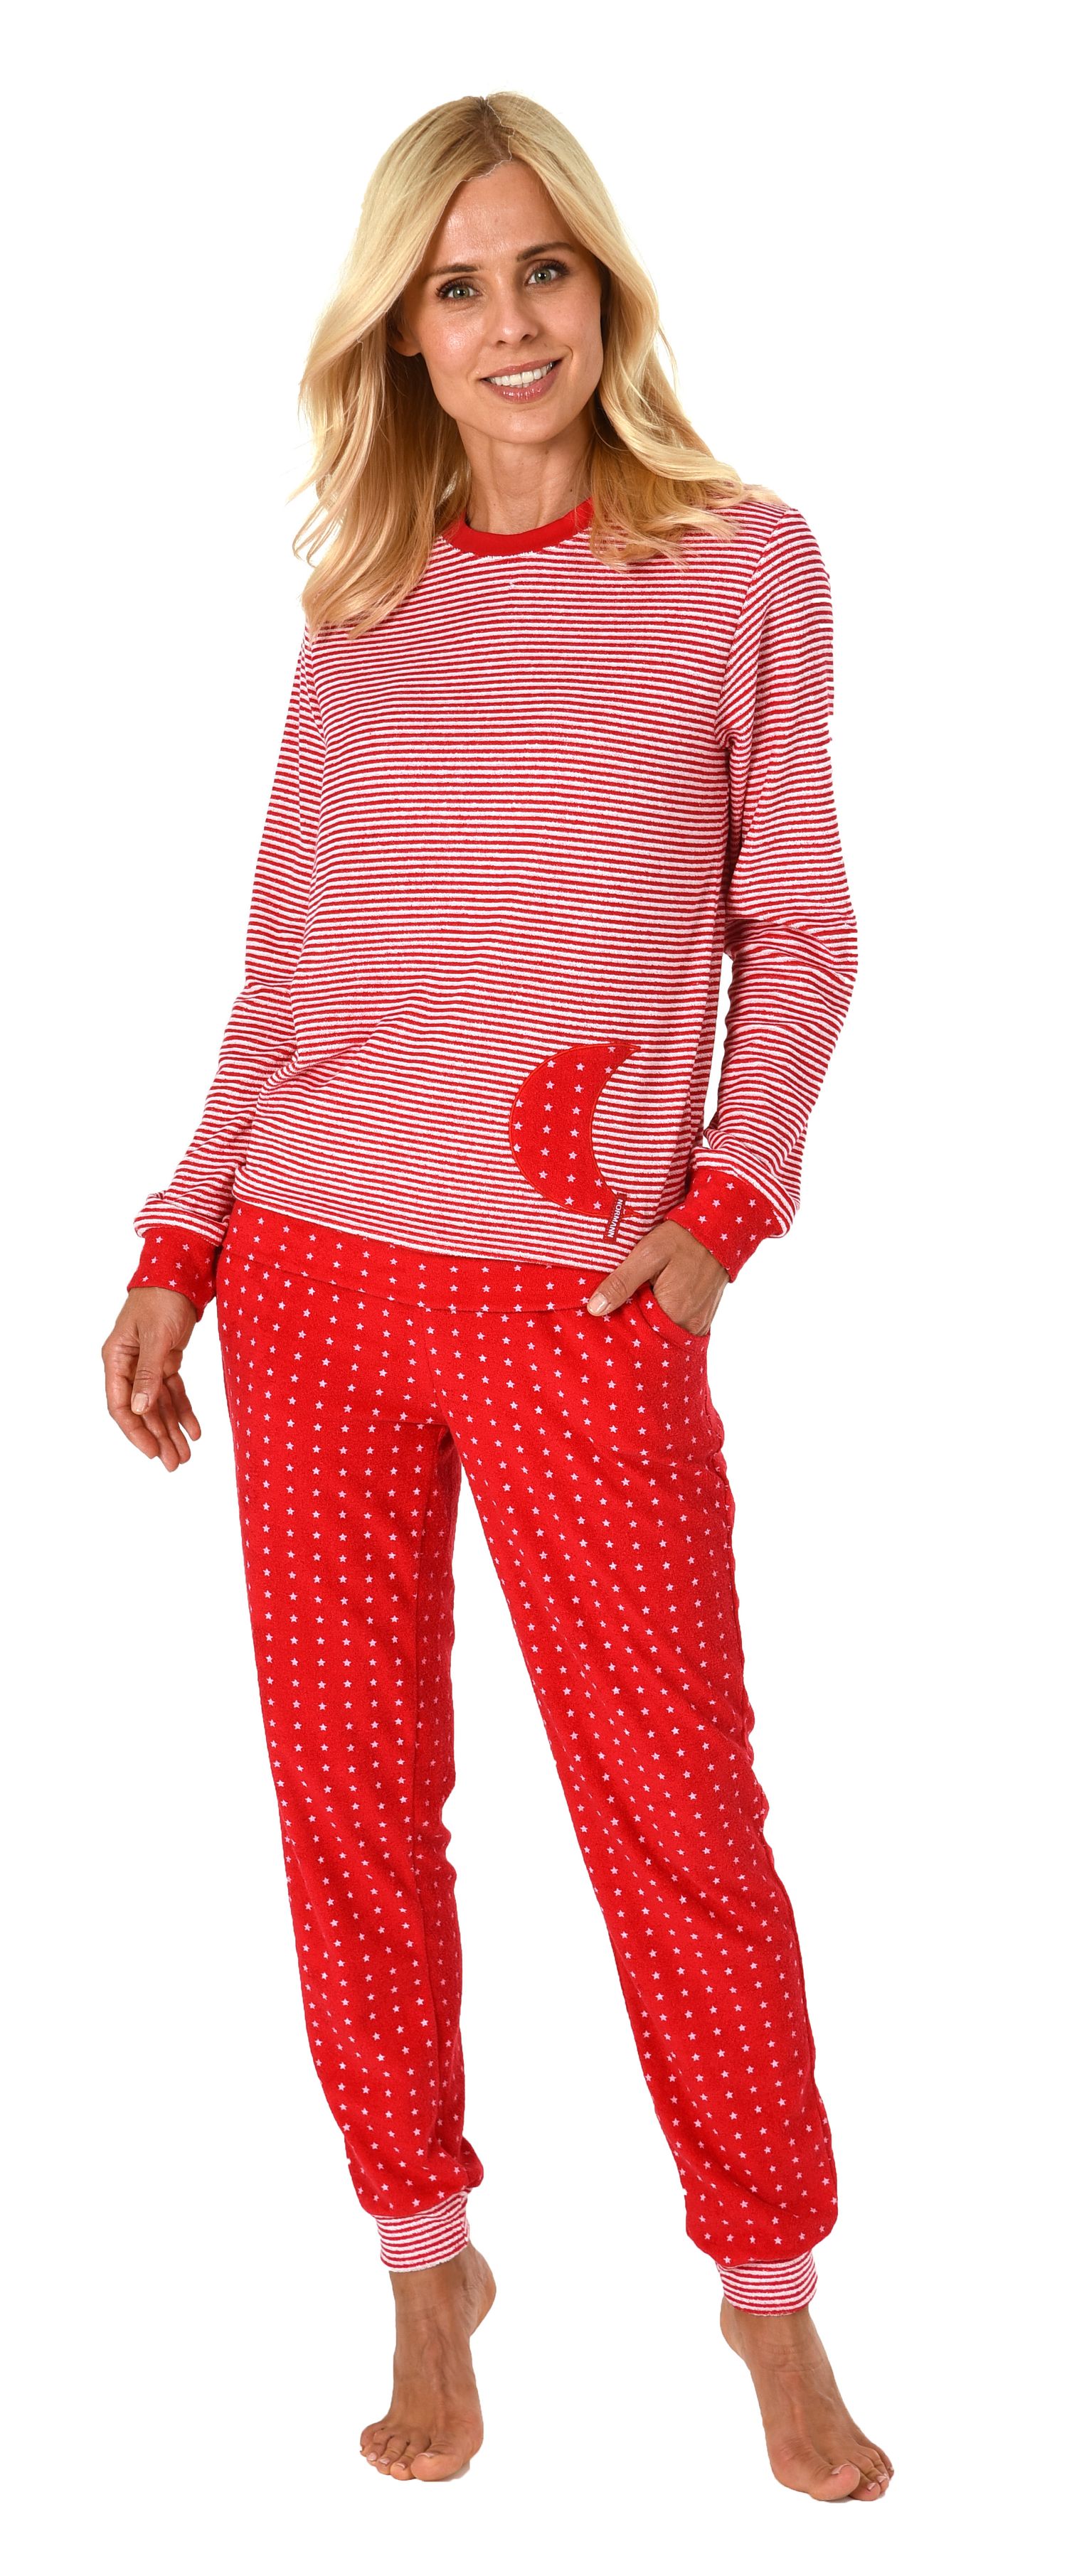 Ladies terry pajamas with cuffs - also in plus size up to 4XL - 201 93 200a